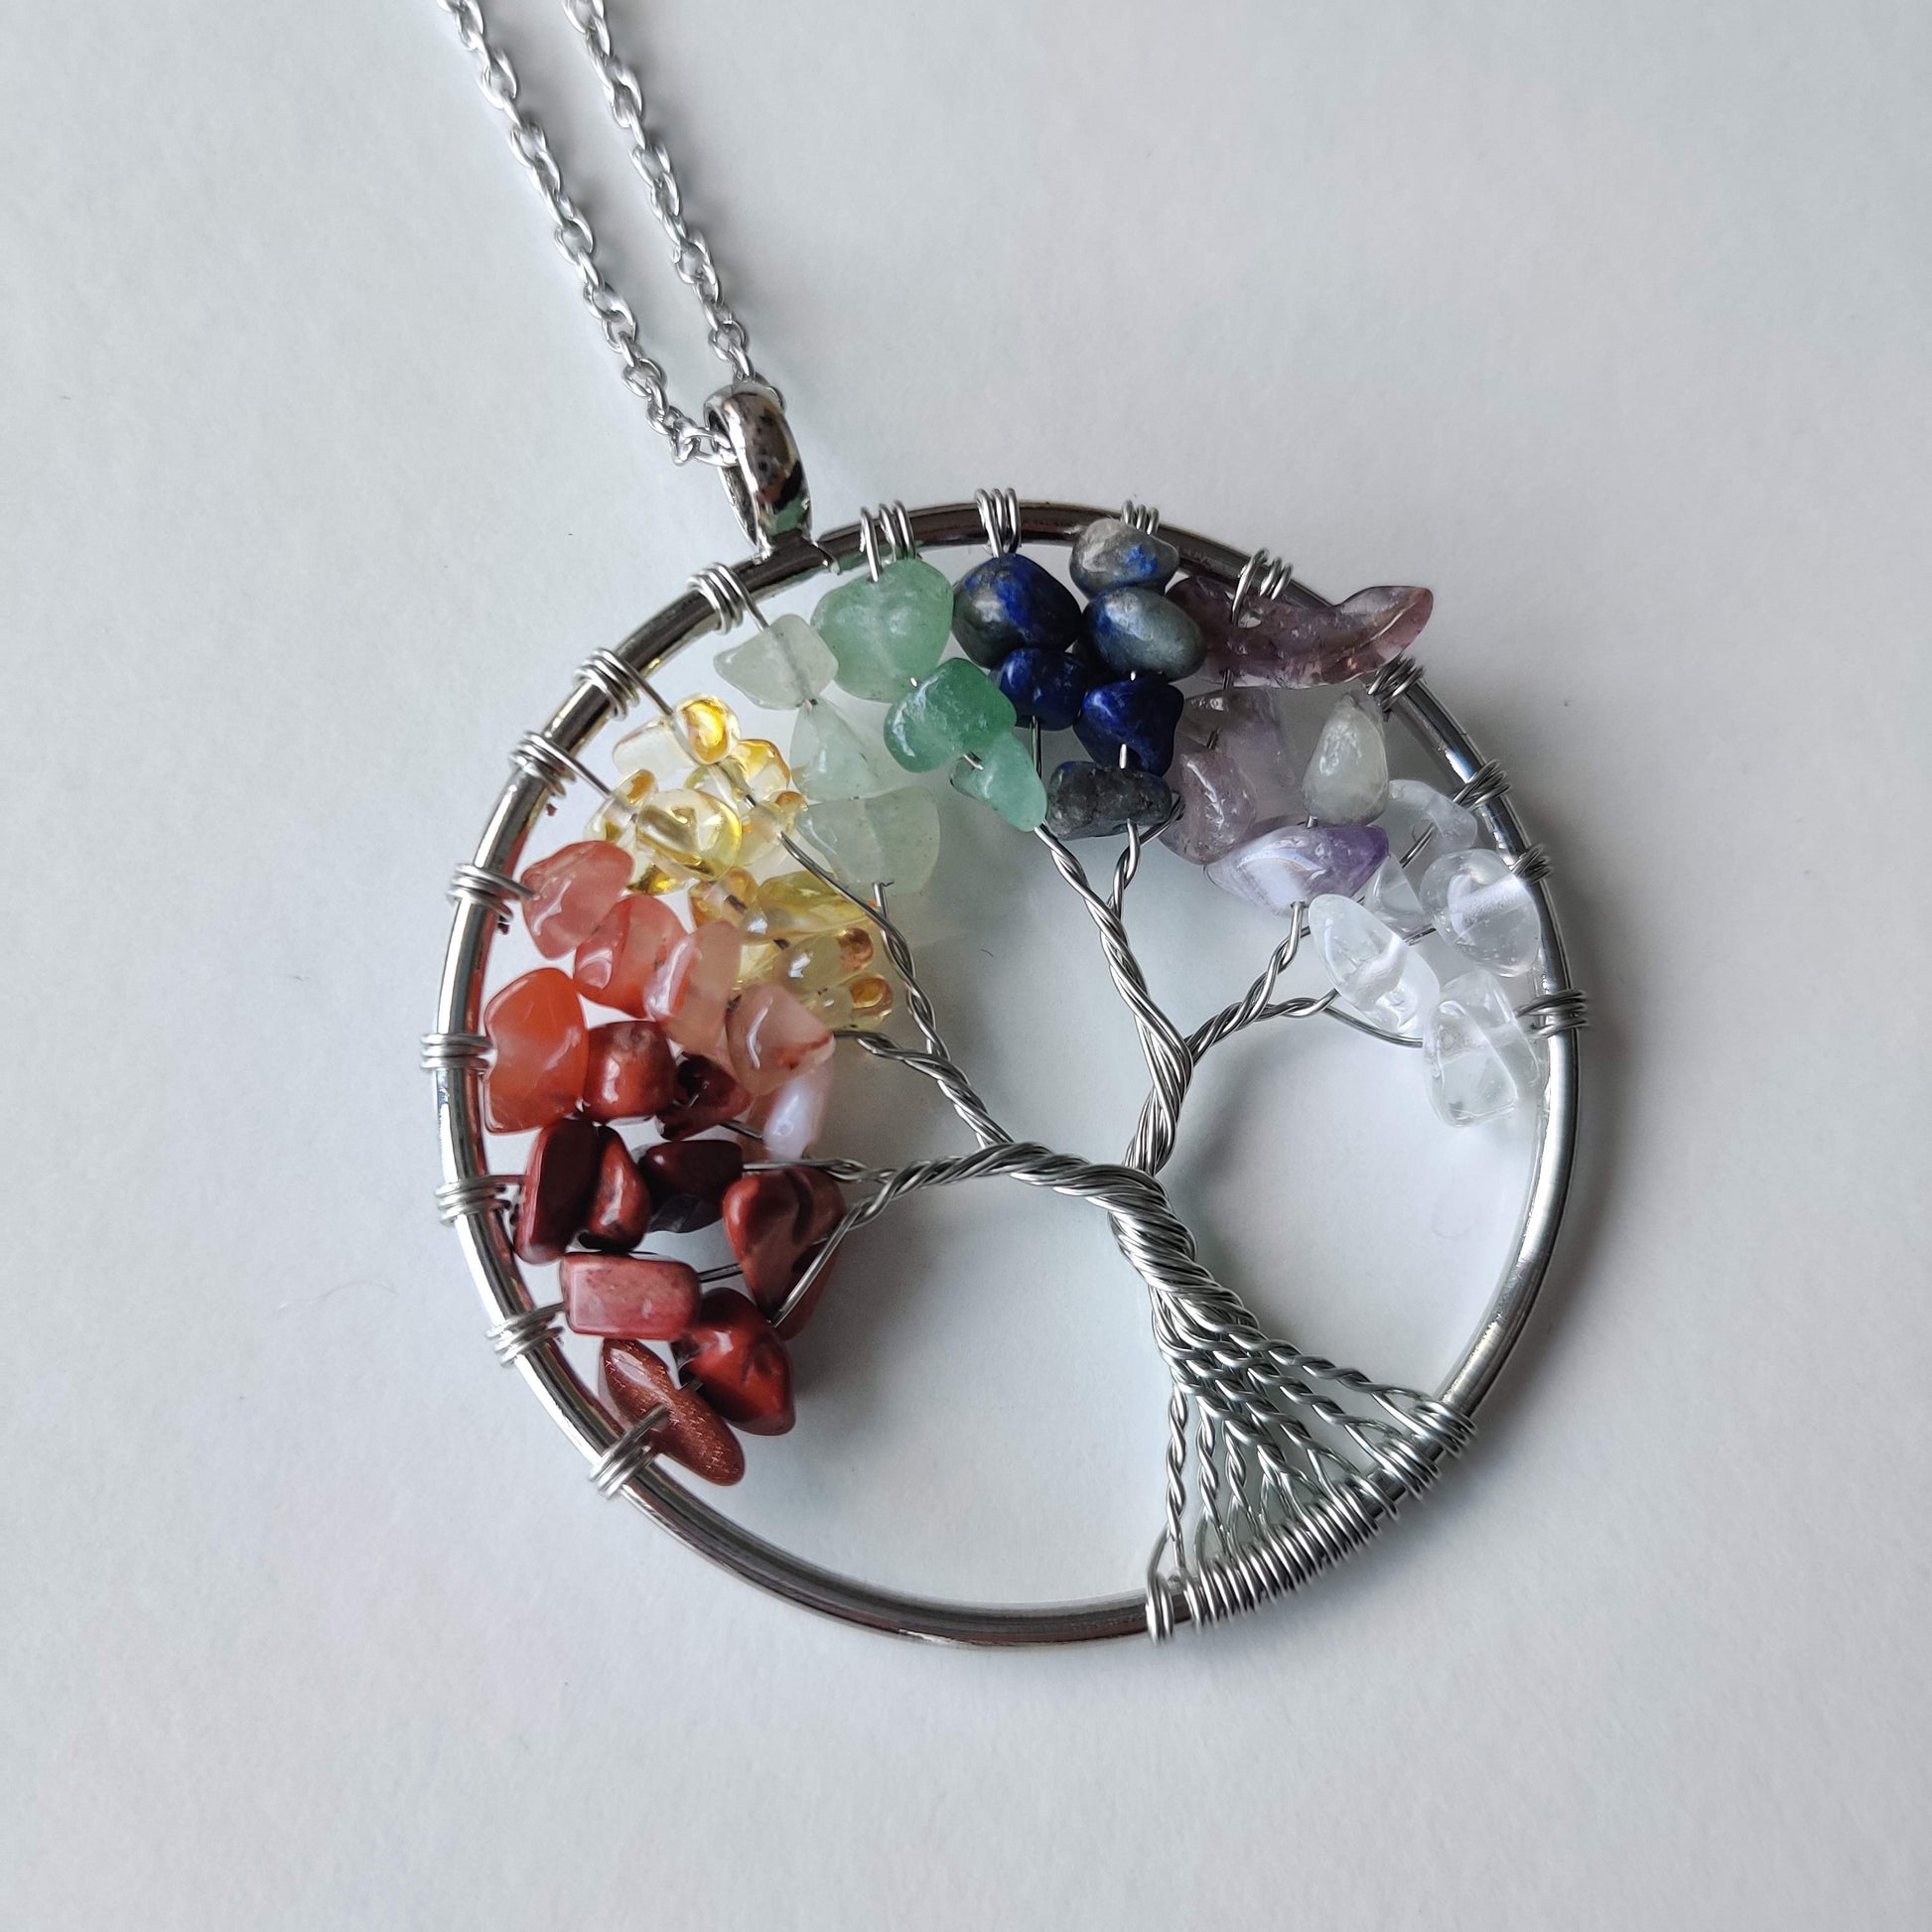 Chakra Tree of Life Pendant with Silver Chain - Rivendell Shop